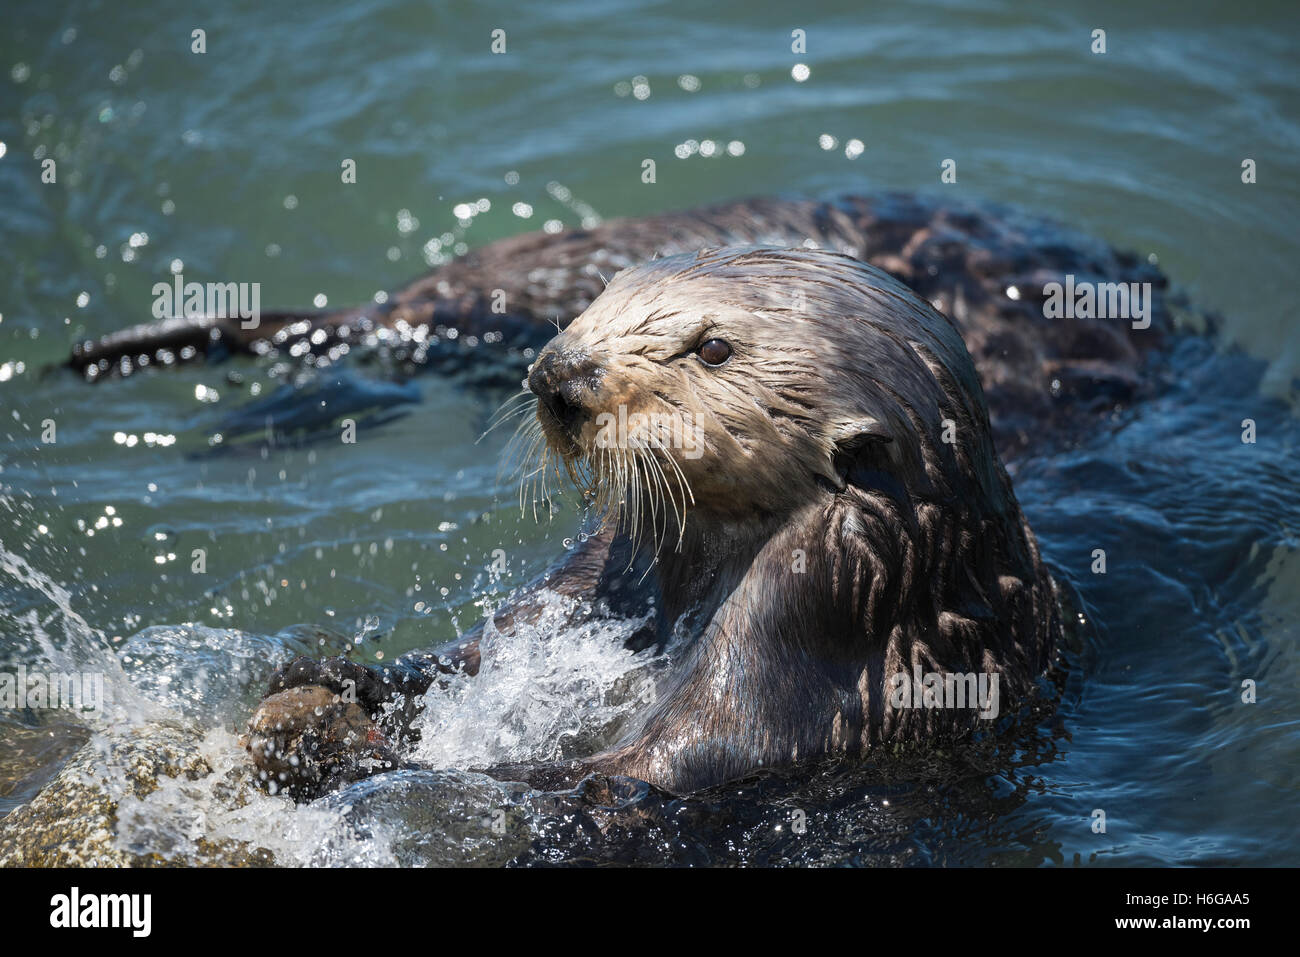 southern sea otter, Enhydra lutris nereis, smashes a mussel against a rock to break it open, Elkhorn Slough, California, USA Stock Photo